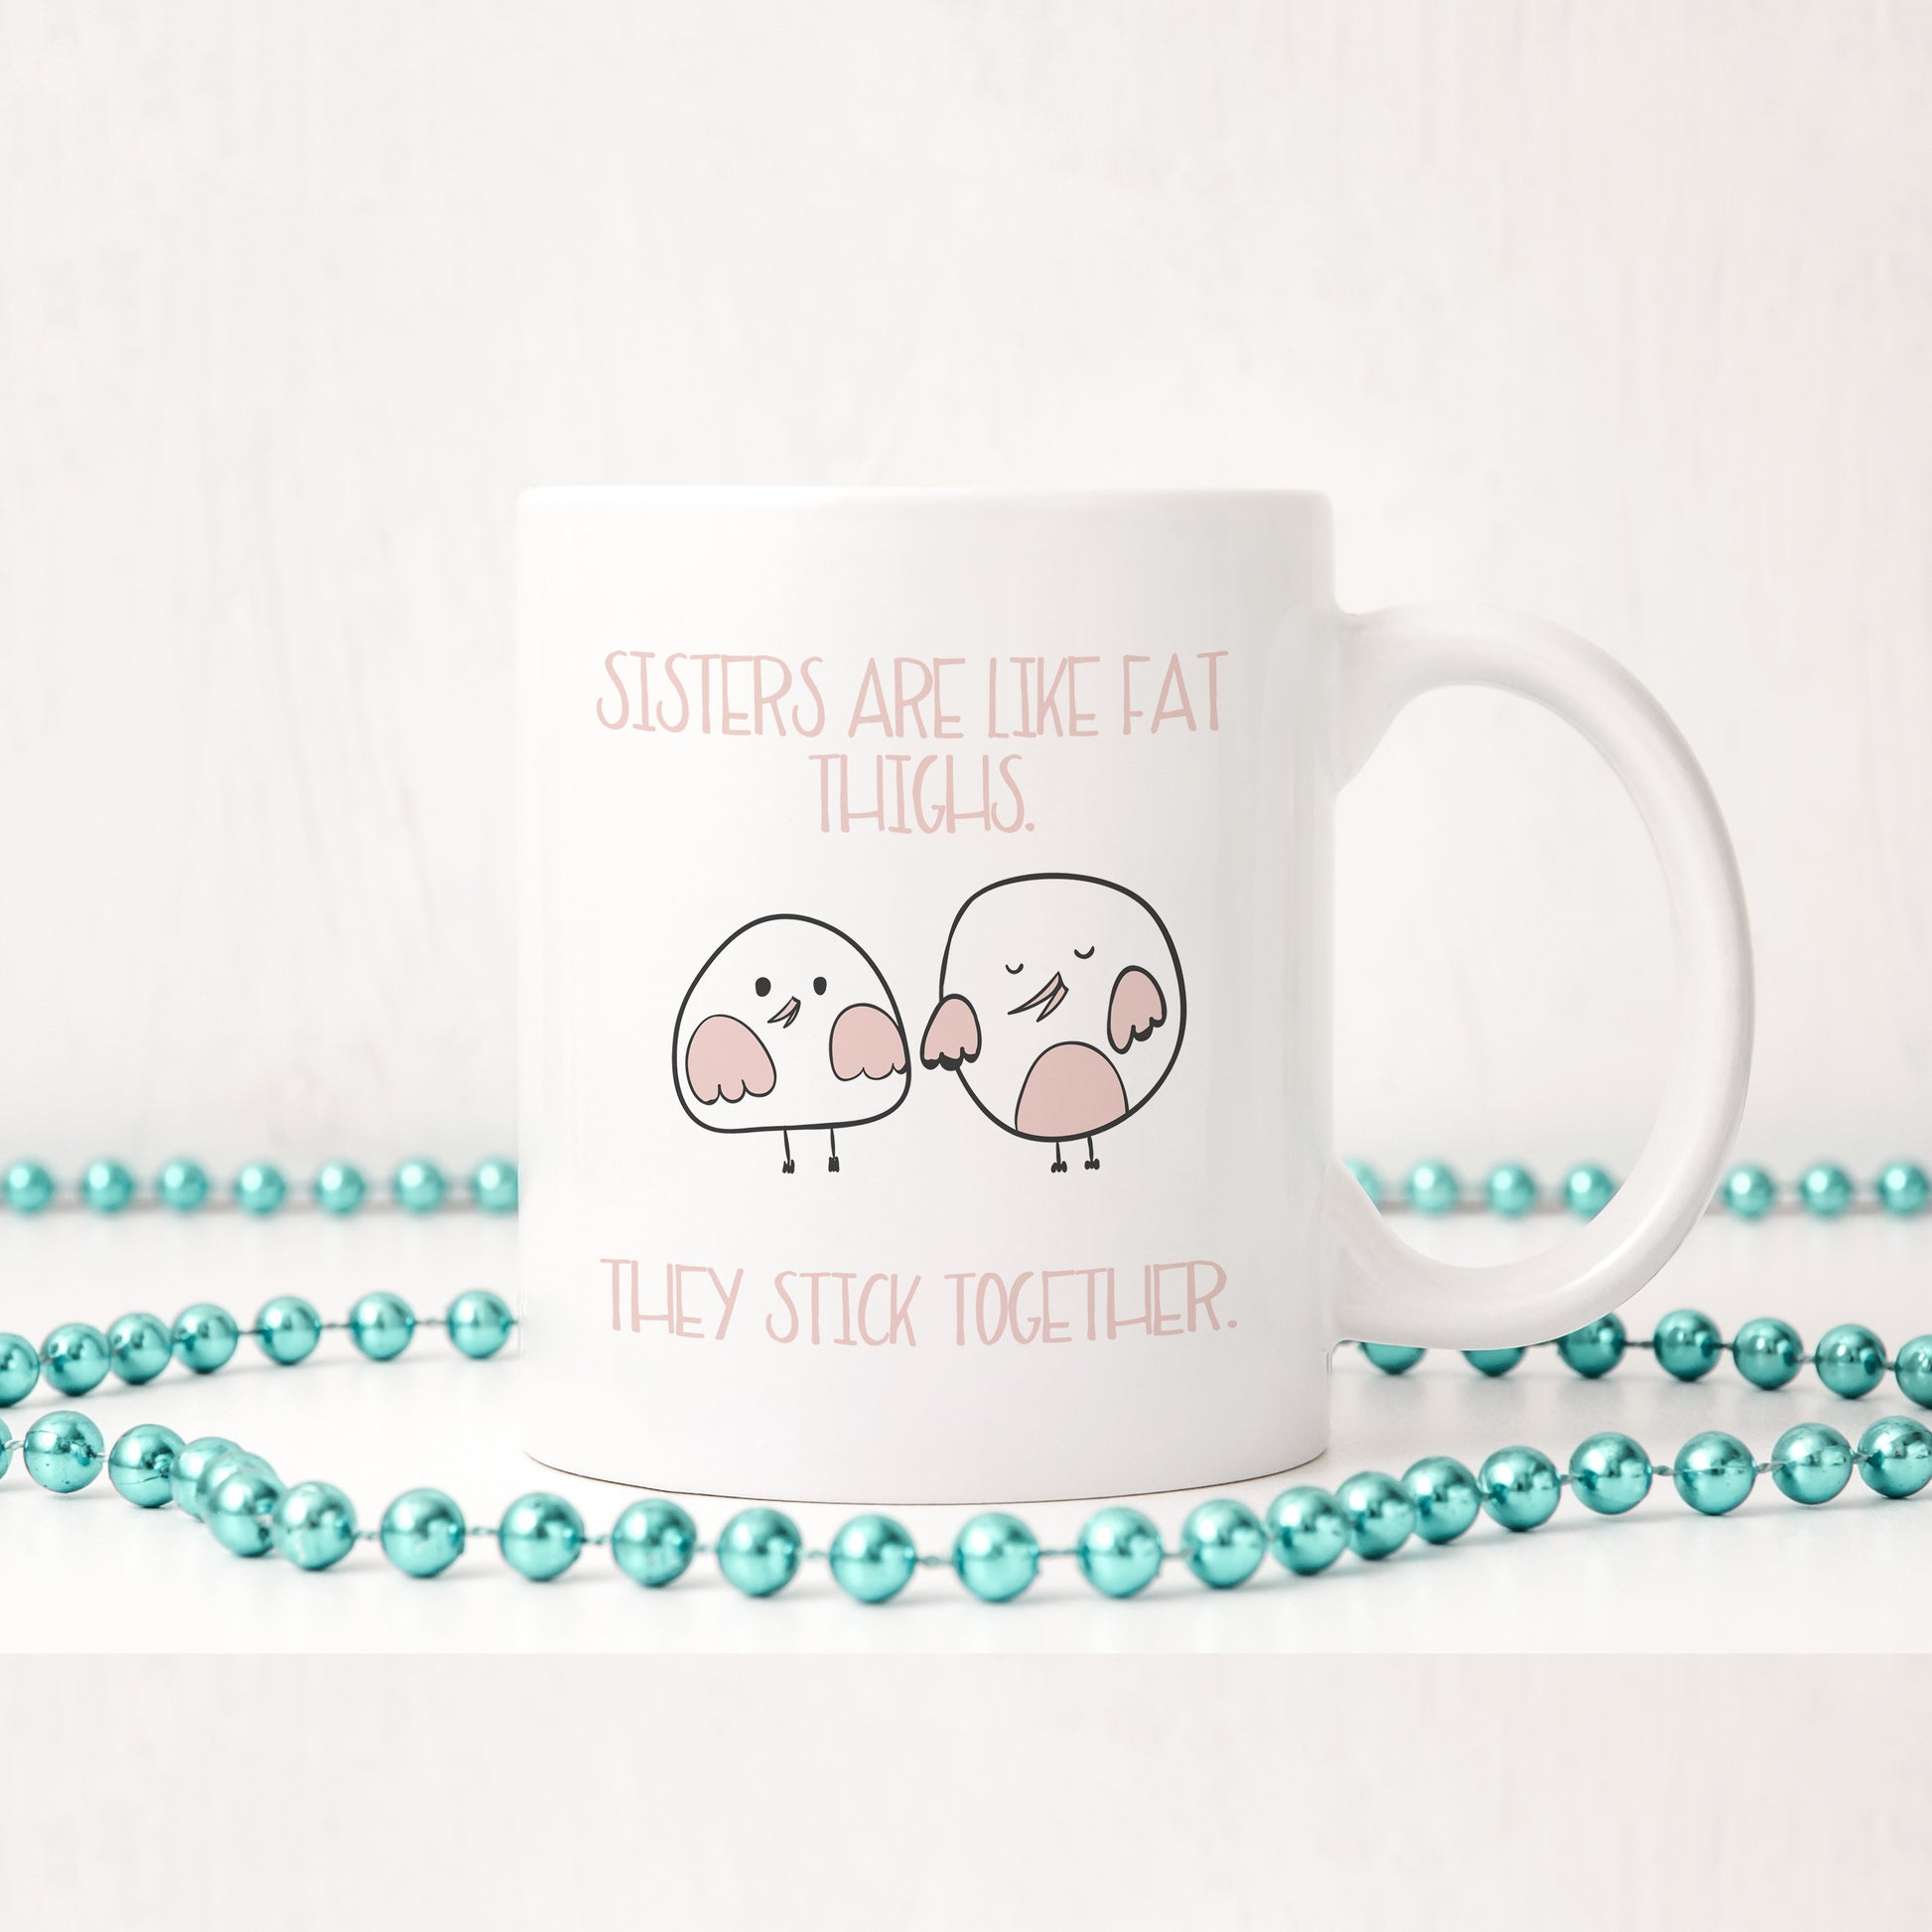 Sisters are like fat thighs - they stick together | Ceramic mug - Adnil Creations